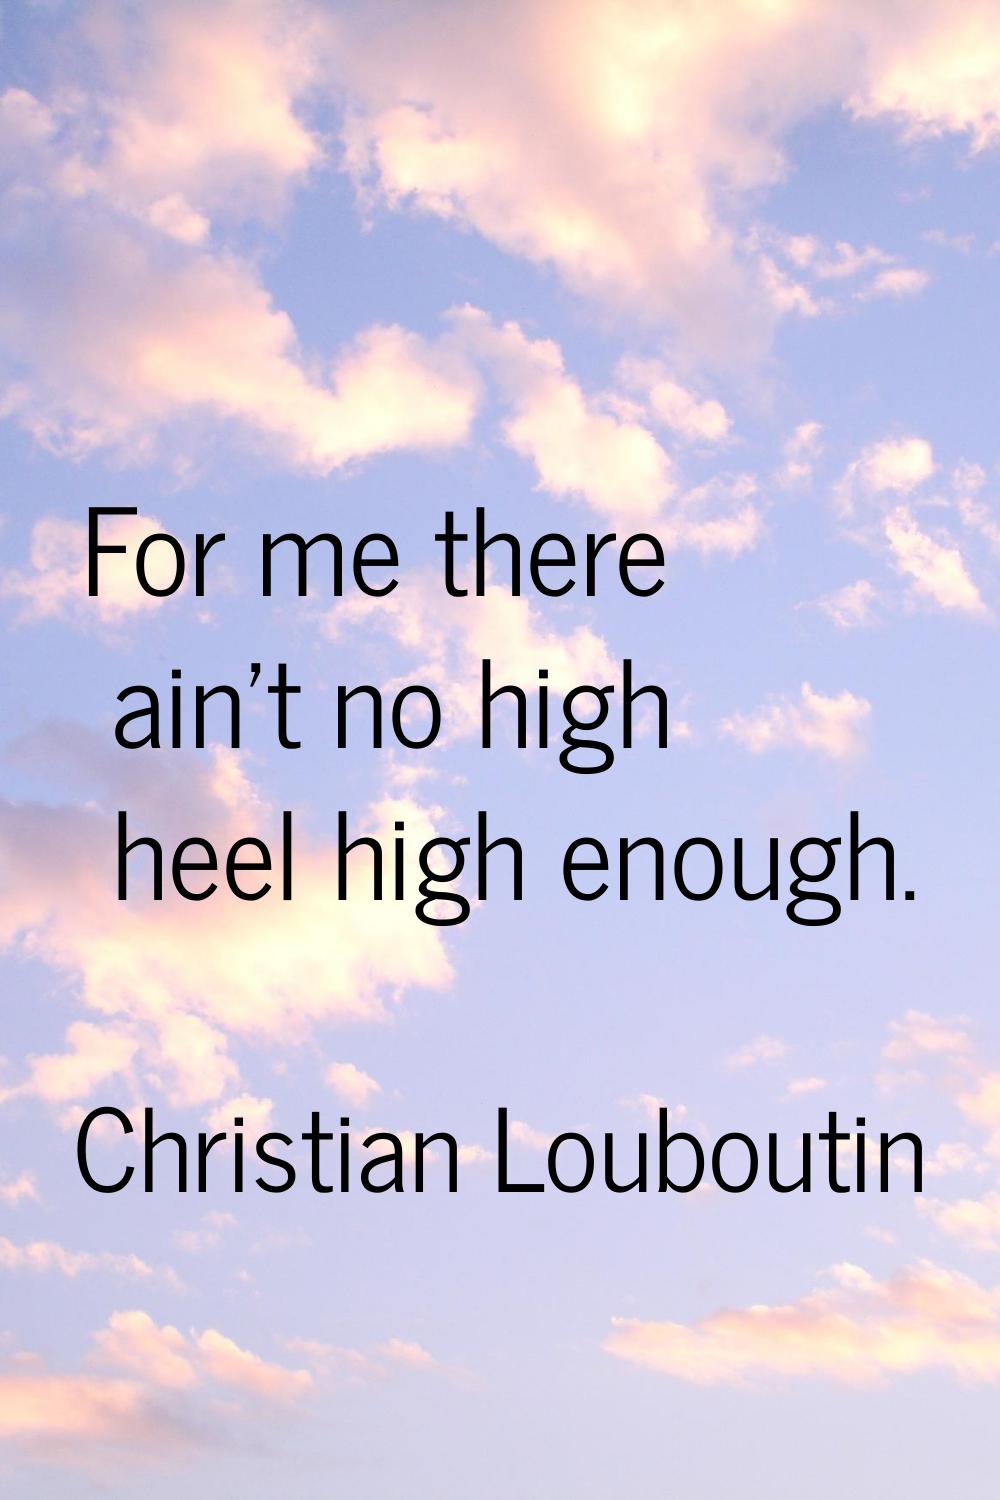 For me there ain't no high heel high enough.